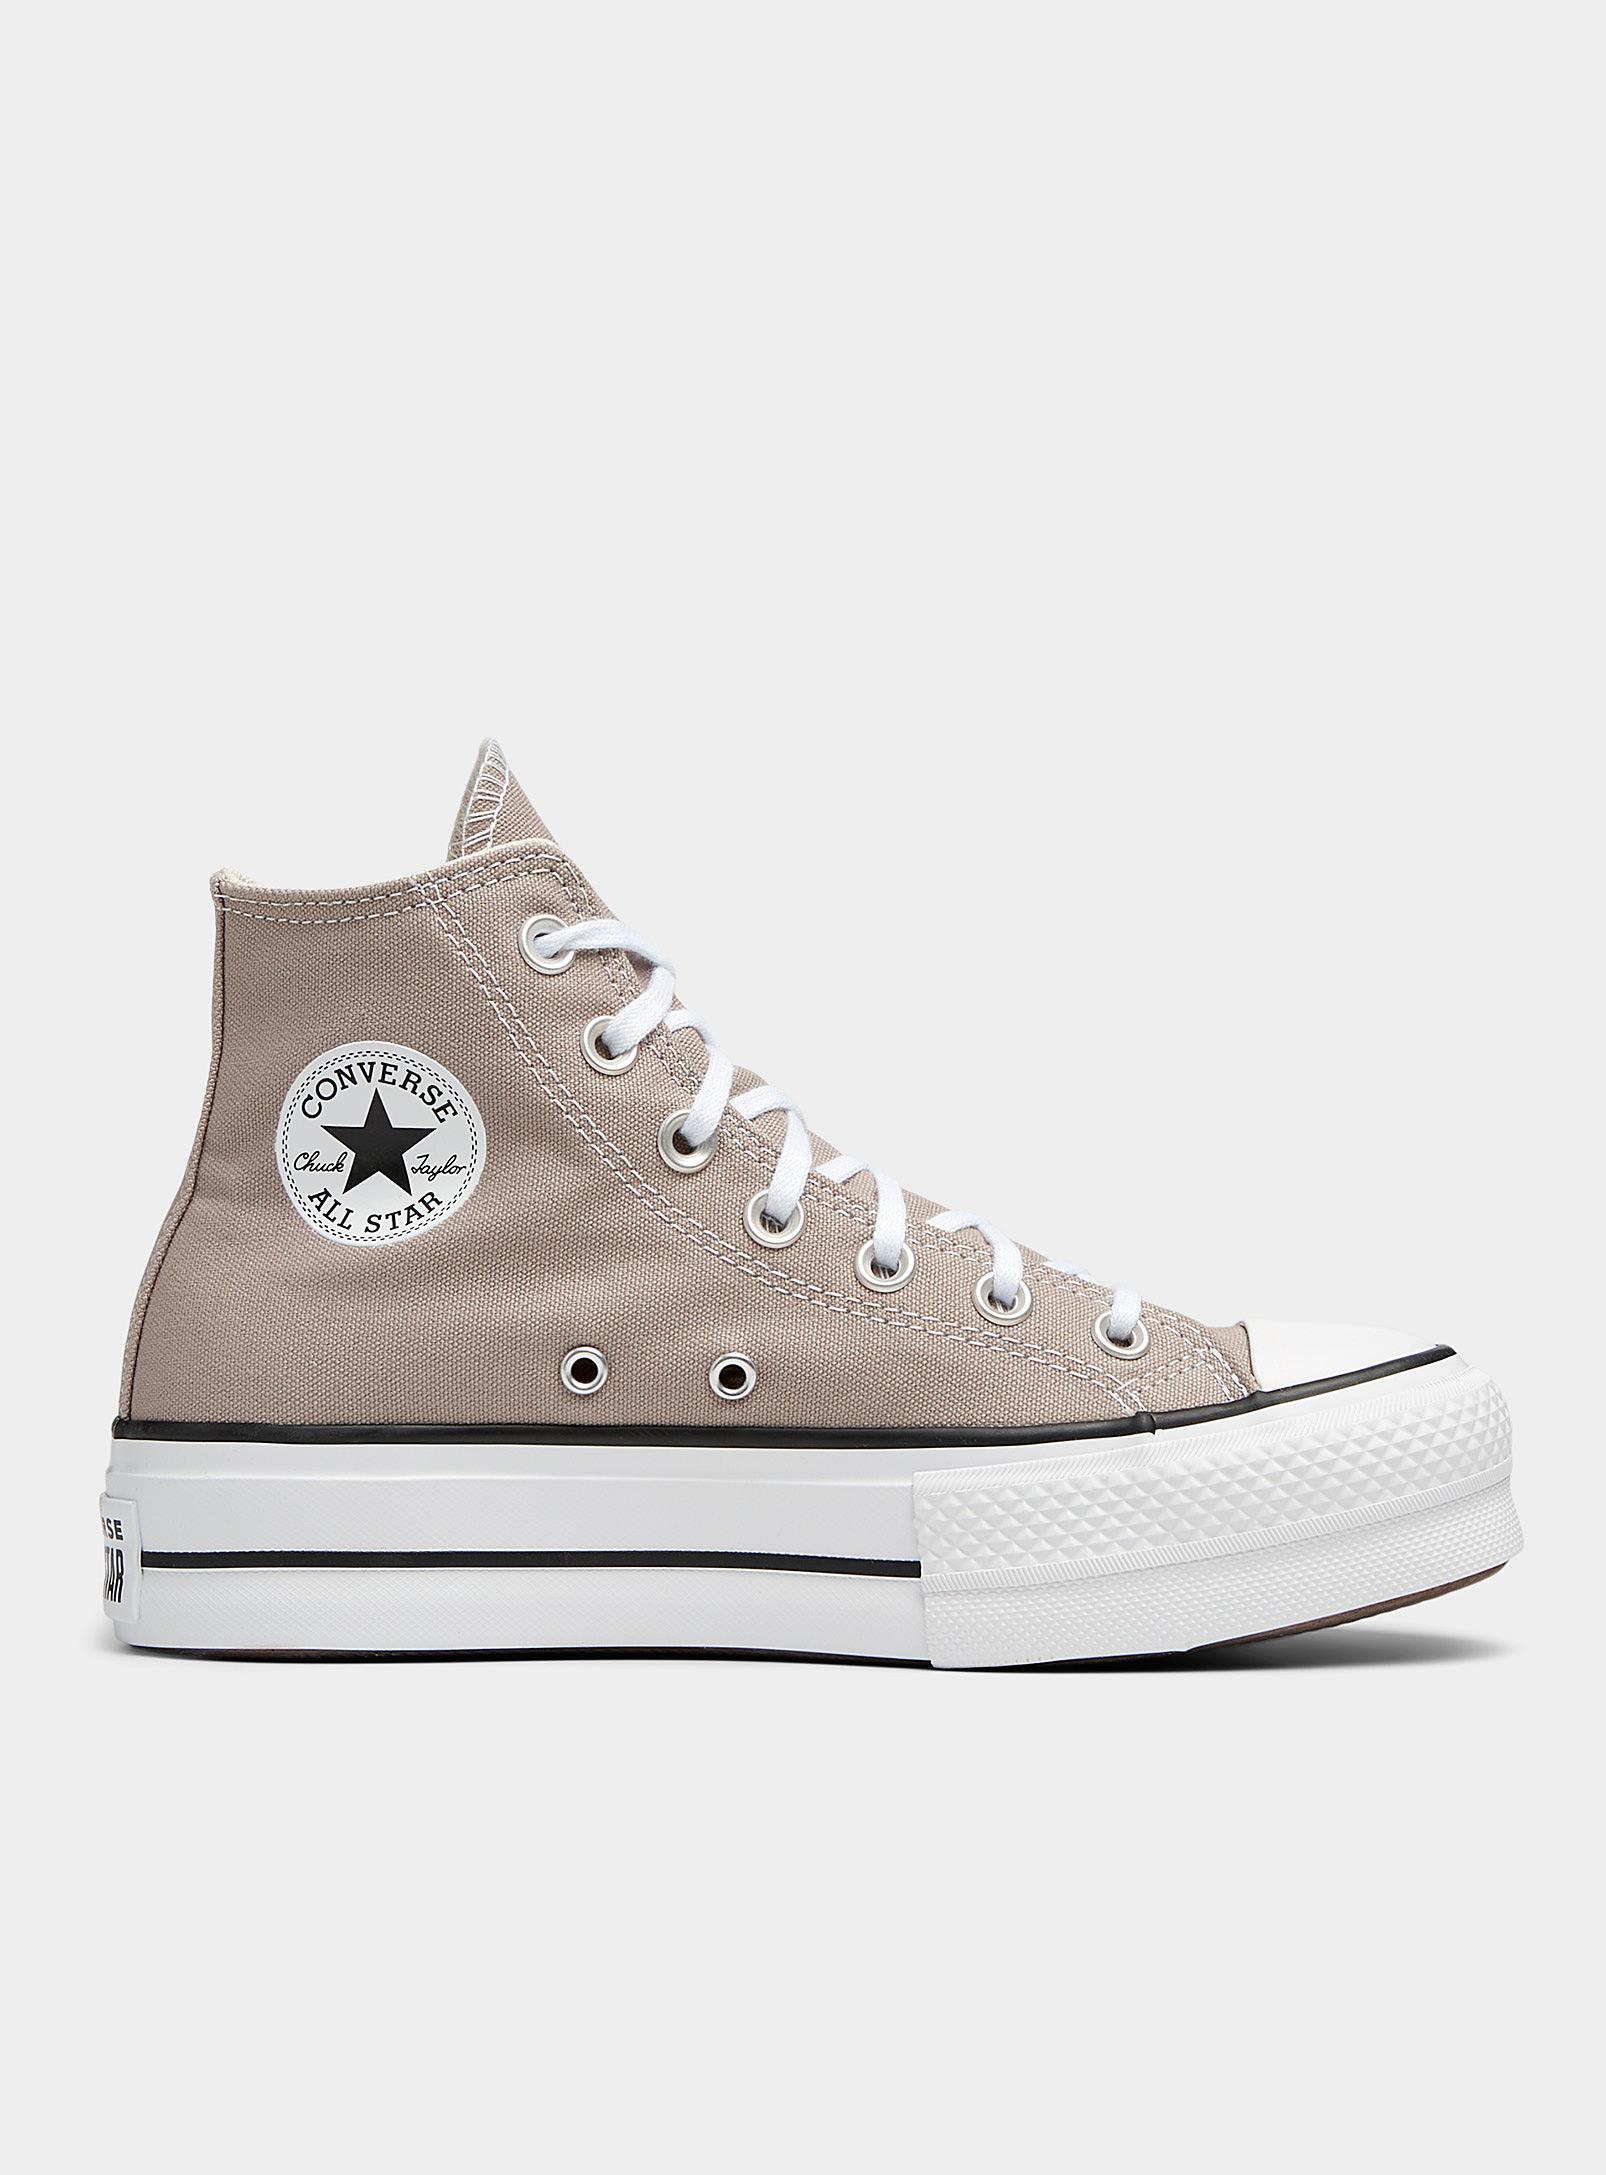 Converse Chuck Taylor All Star Lift High Top Sandy Beige Sneakers Women in  Brown | Lyst